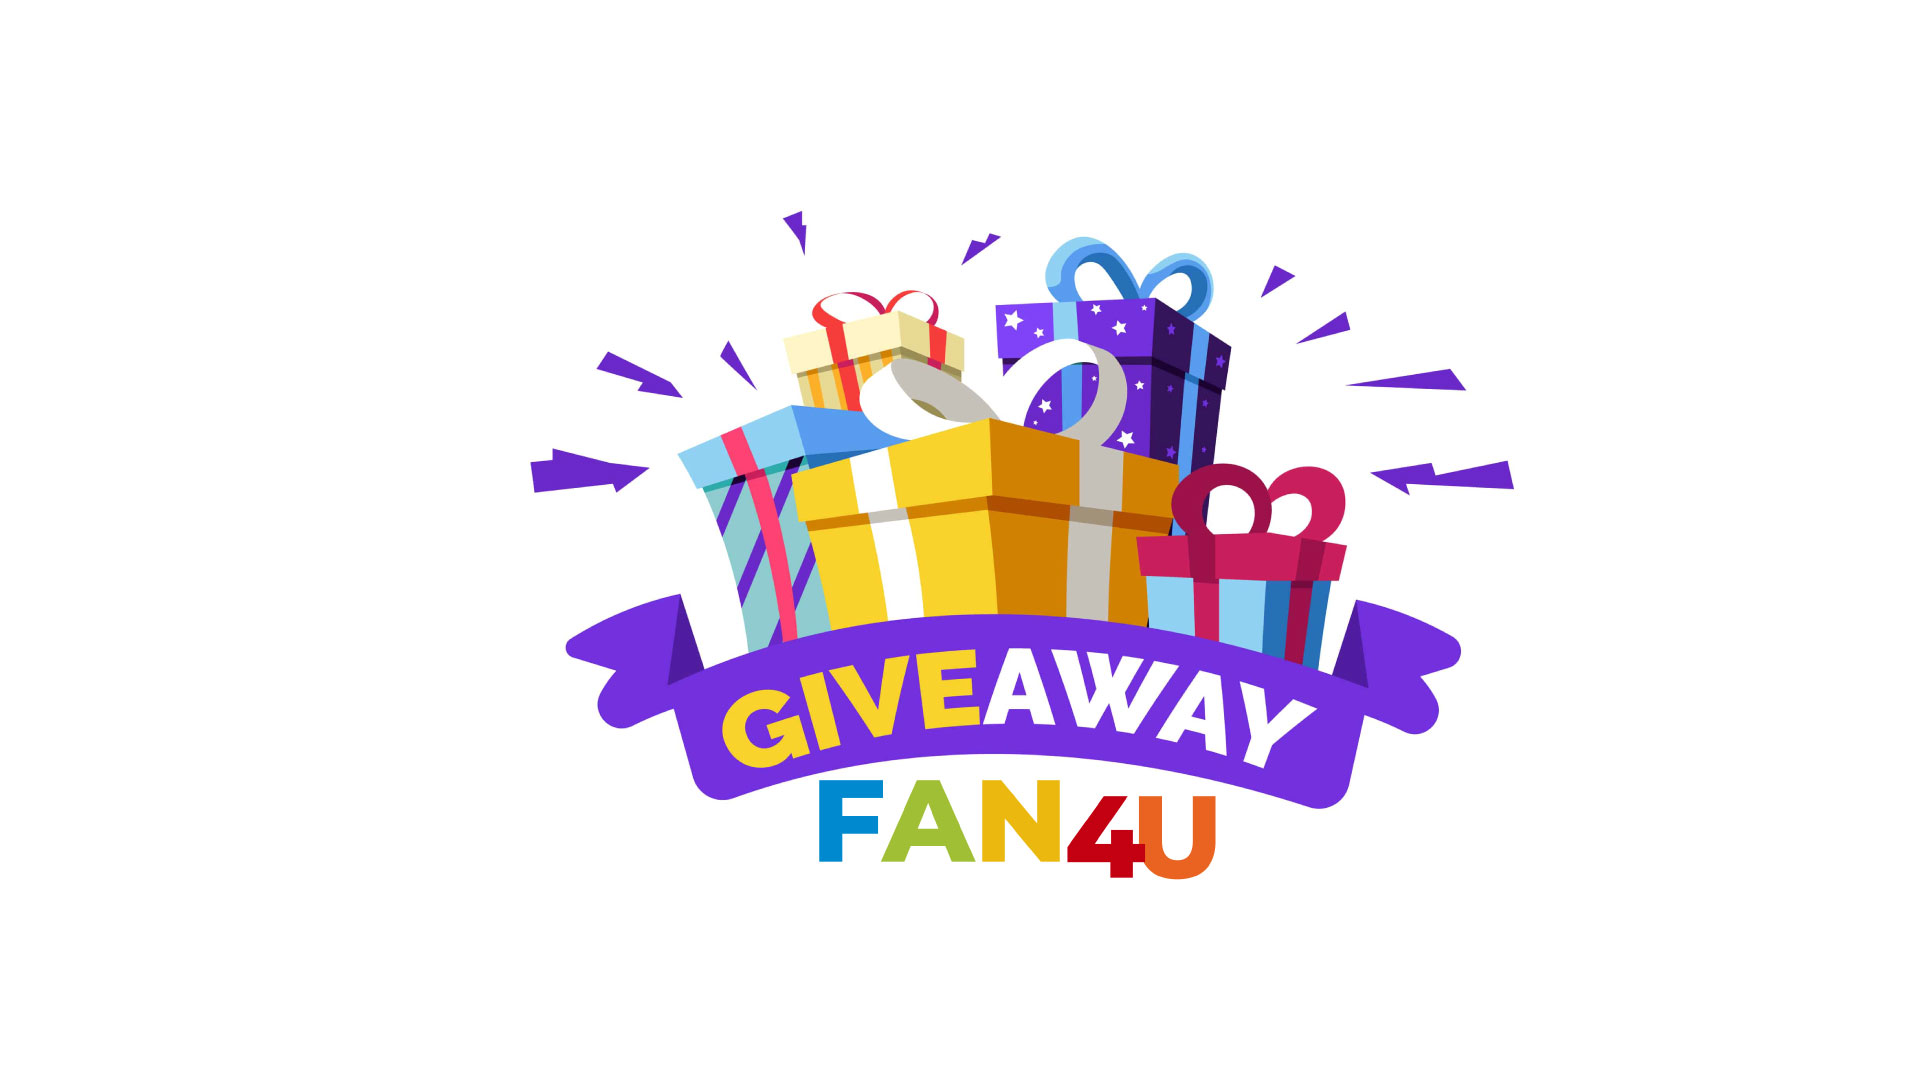 Image of a gift box, symbol of a giveaway prize, with the Fan4U logo. The box represents the excitement and anticipation of winning a unique and customized prize from Fan4U.